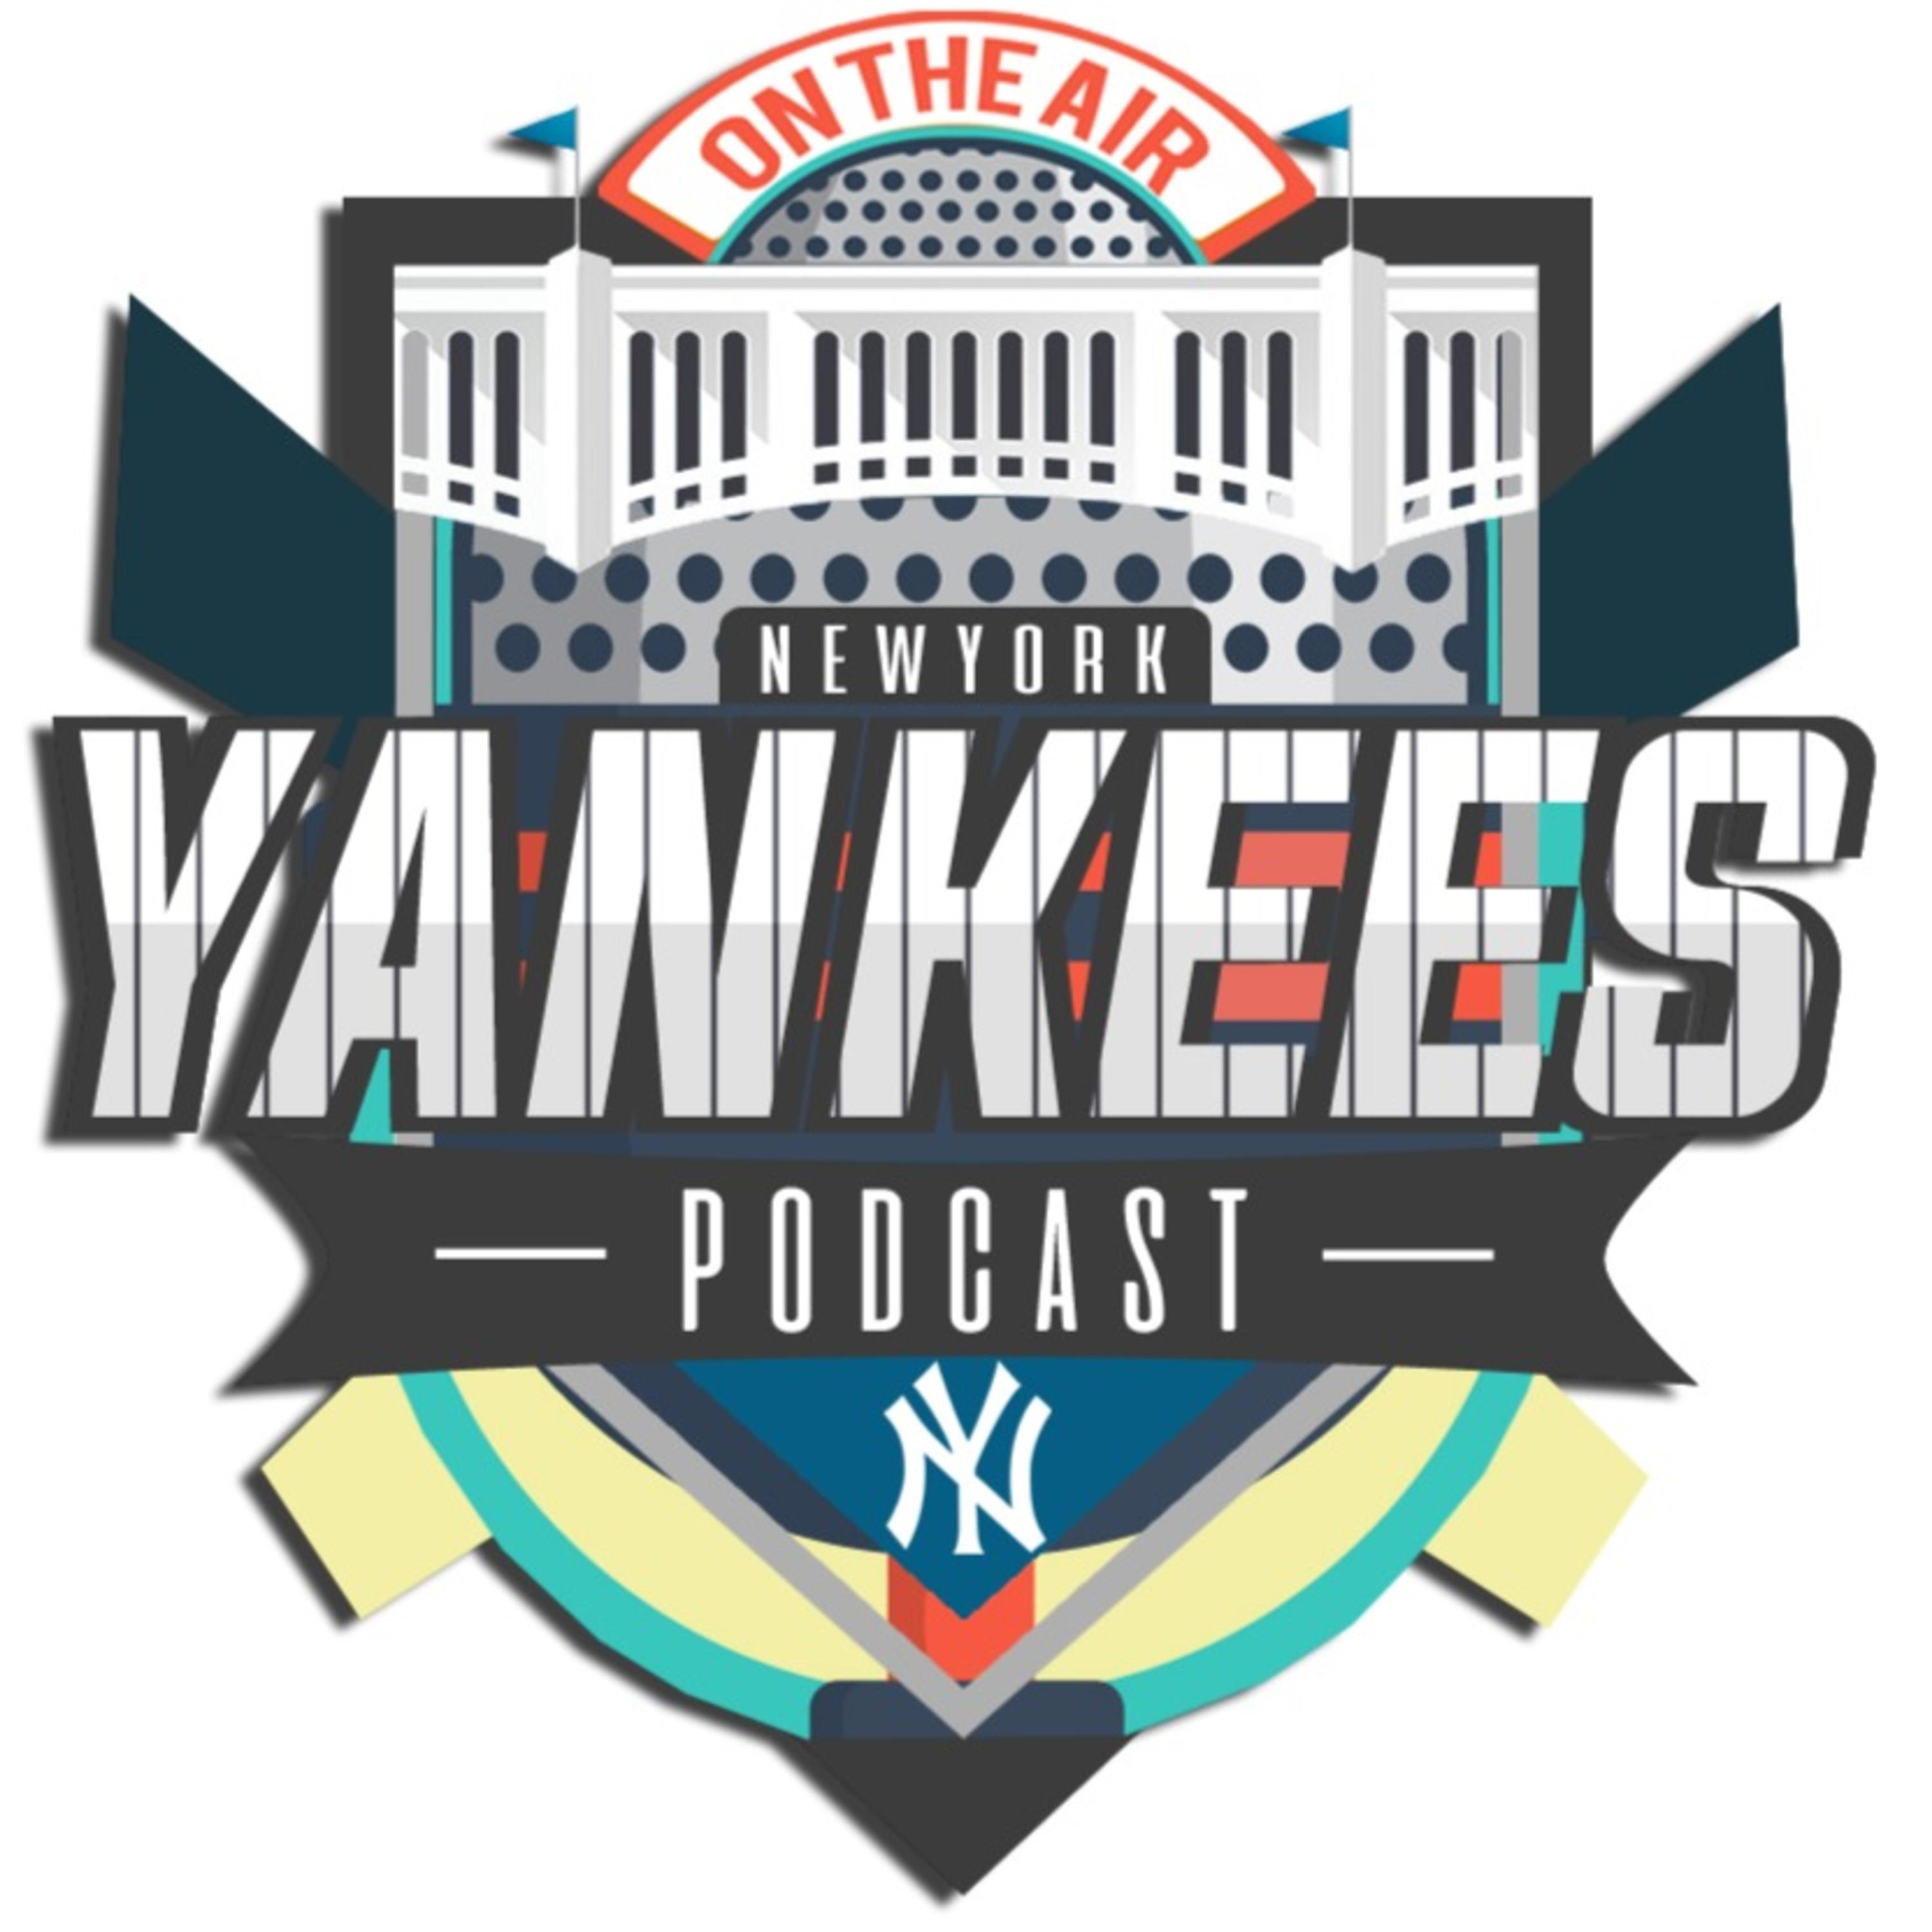 New York Yankees Hungary Podcast - Bé x DS! x Mike - S02EP10